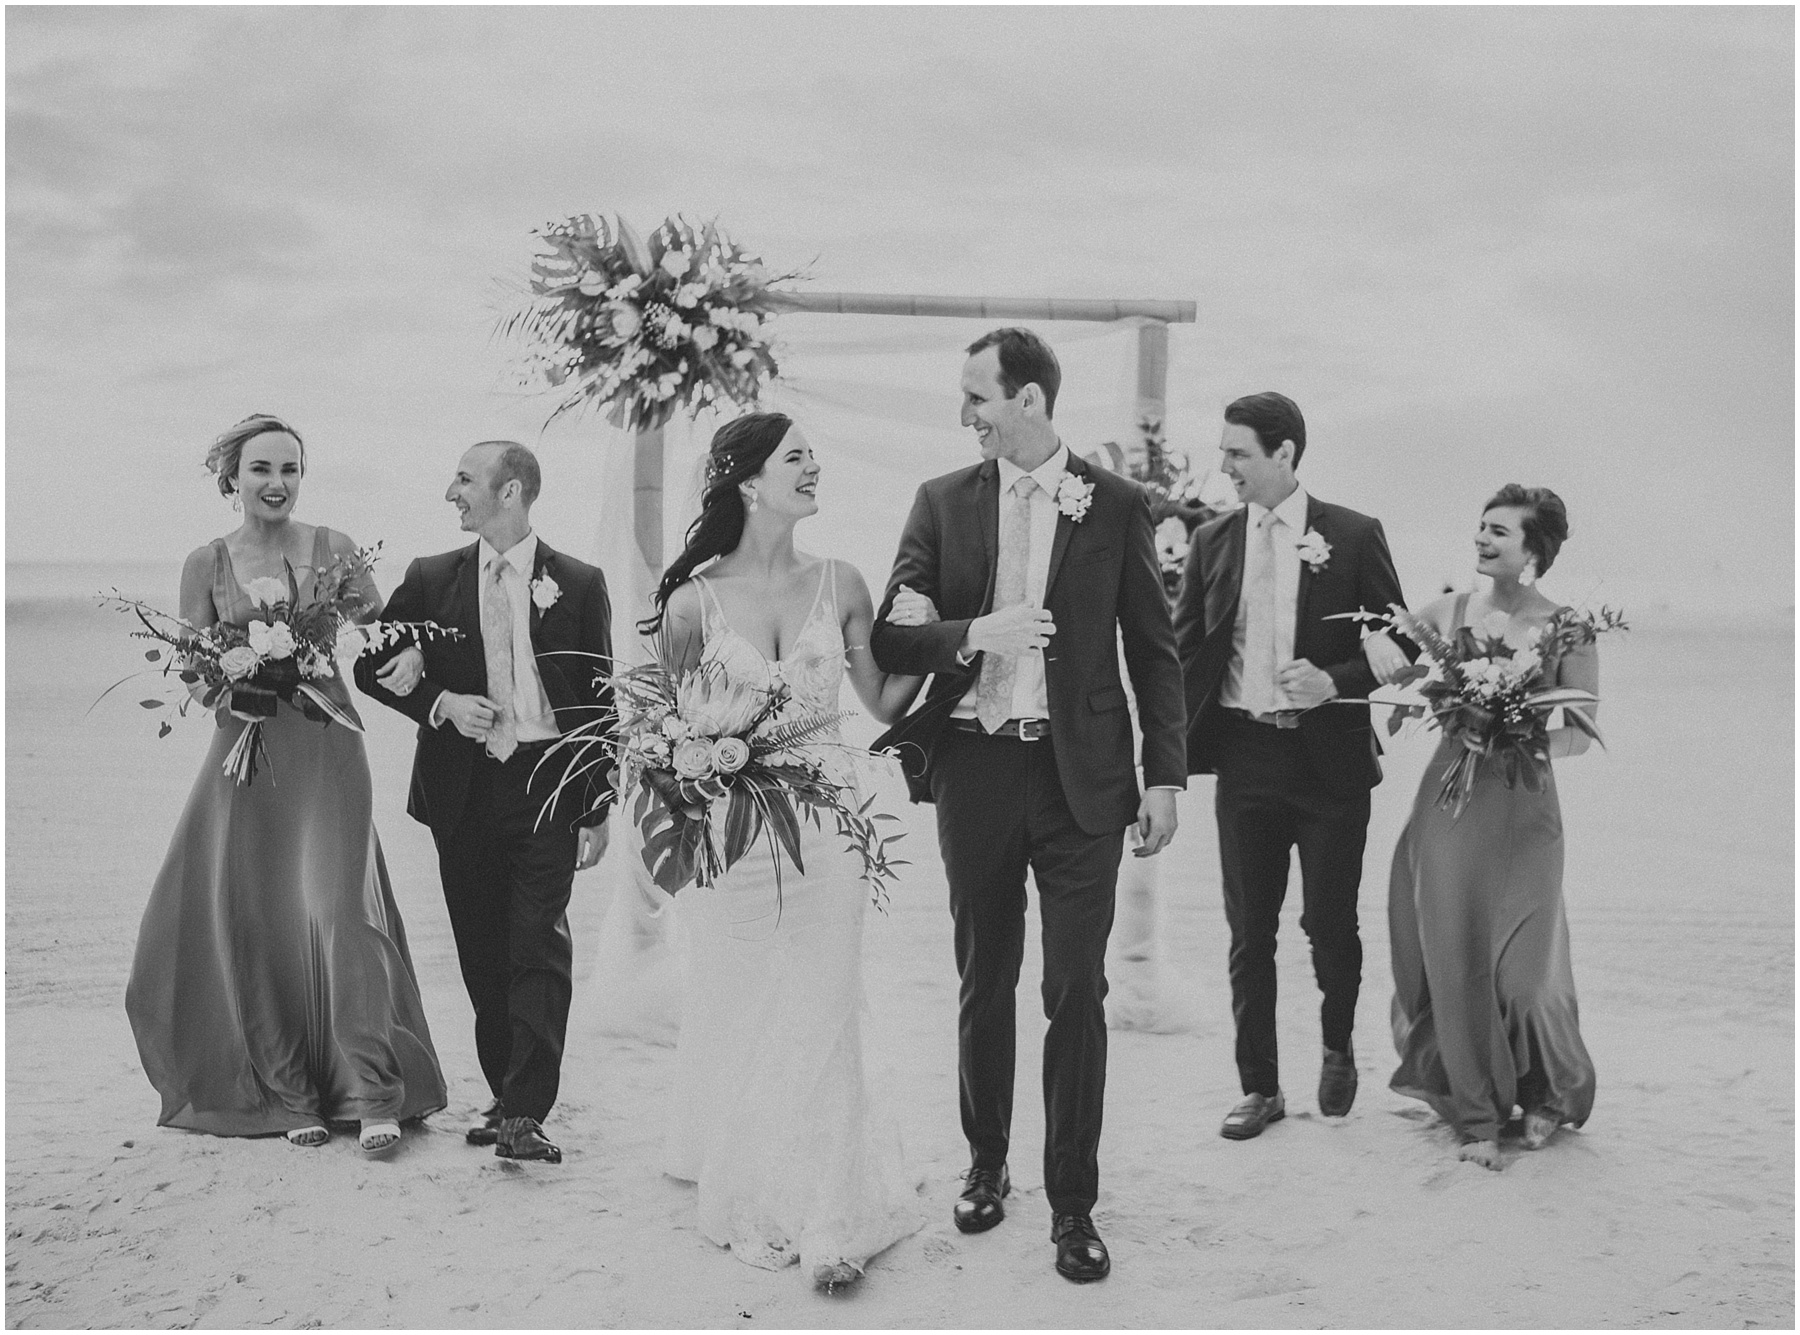 Bridal party smiles on wedding day at JW Marriott Marco Island in Florida